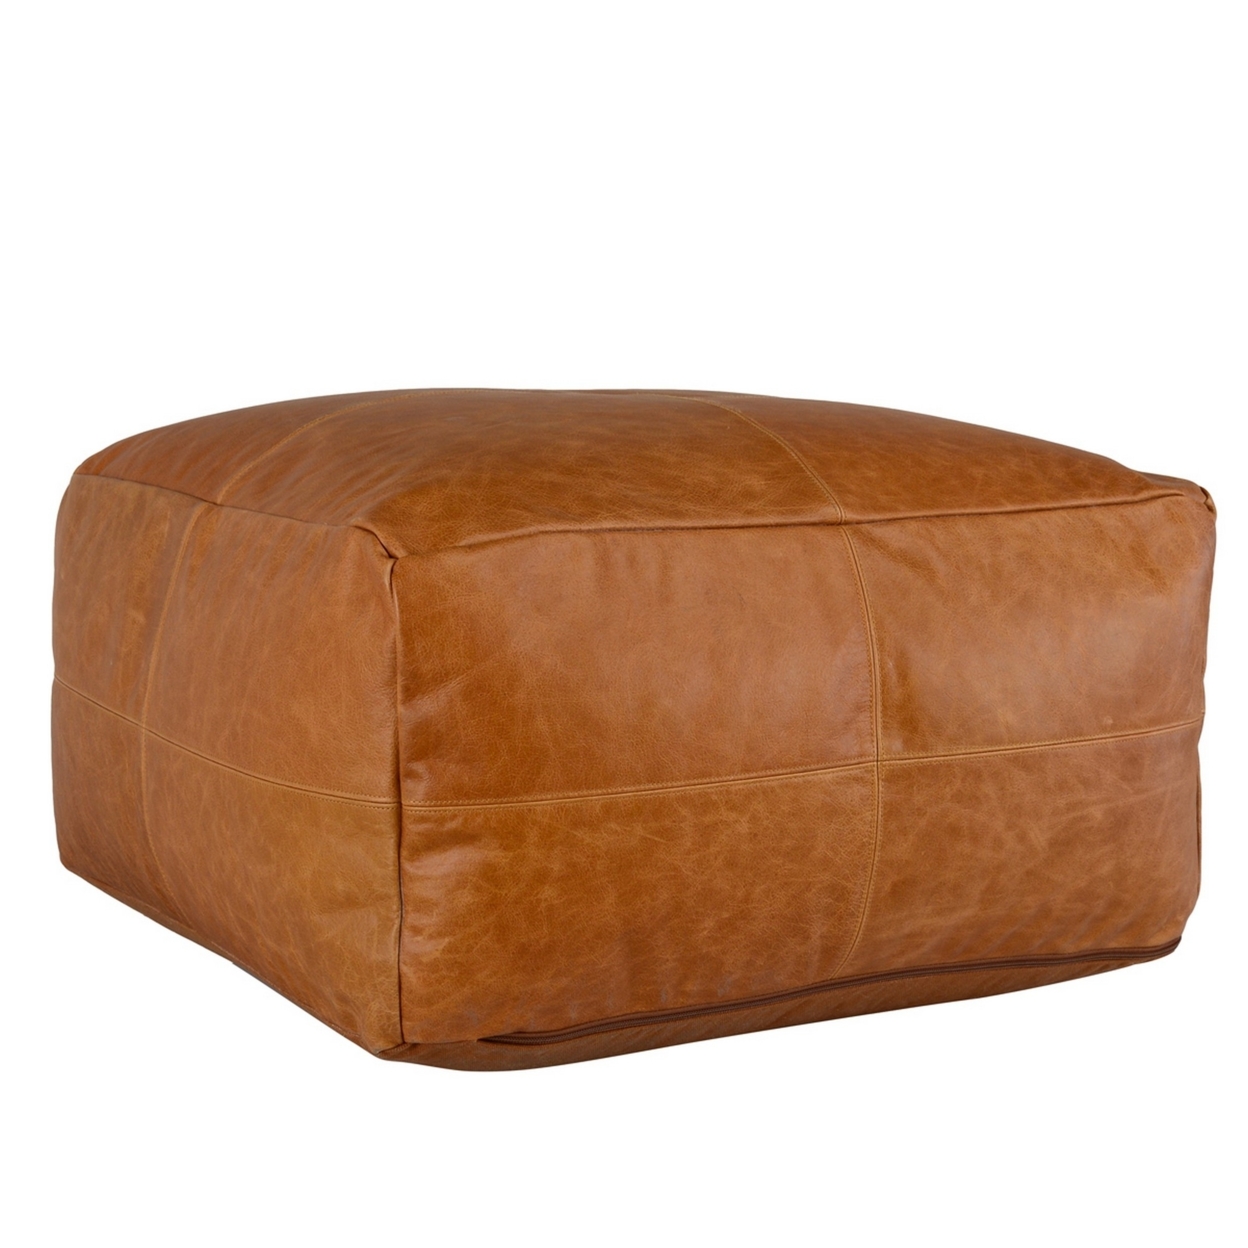 Norm 24 Inch Square Pouf, Soft Bead Filled, Pieced Design Brown Leather- Saltoro Sherpi